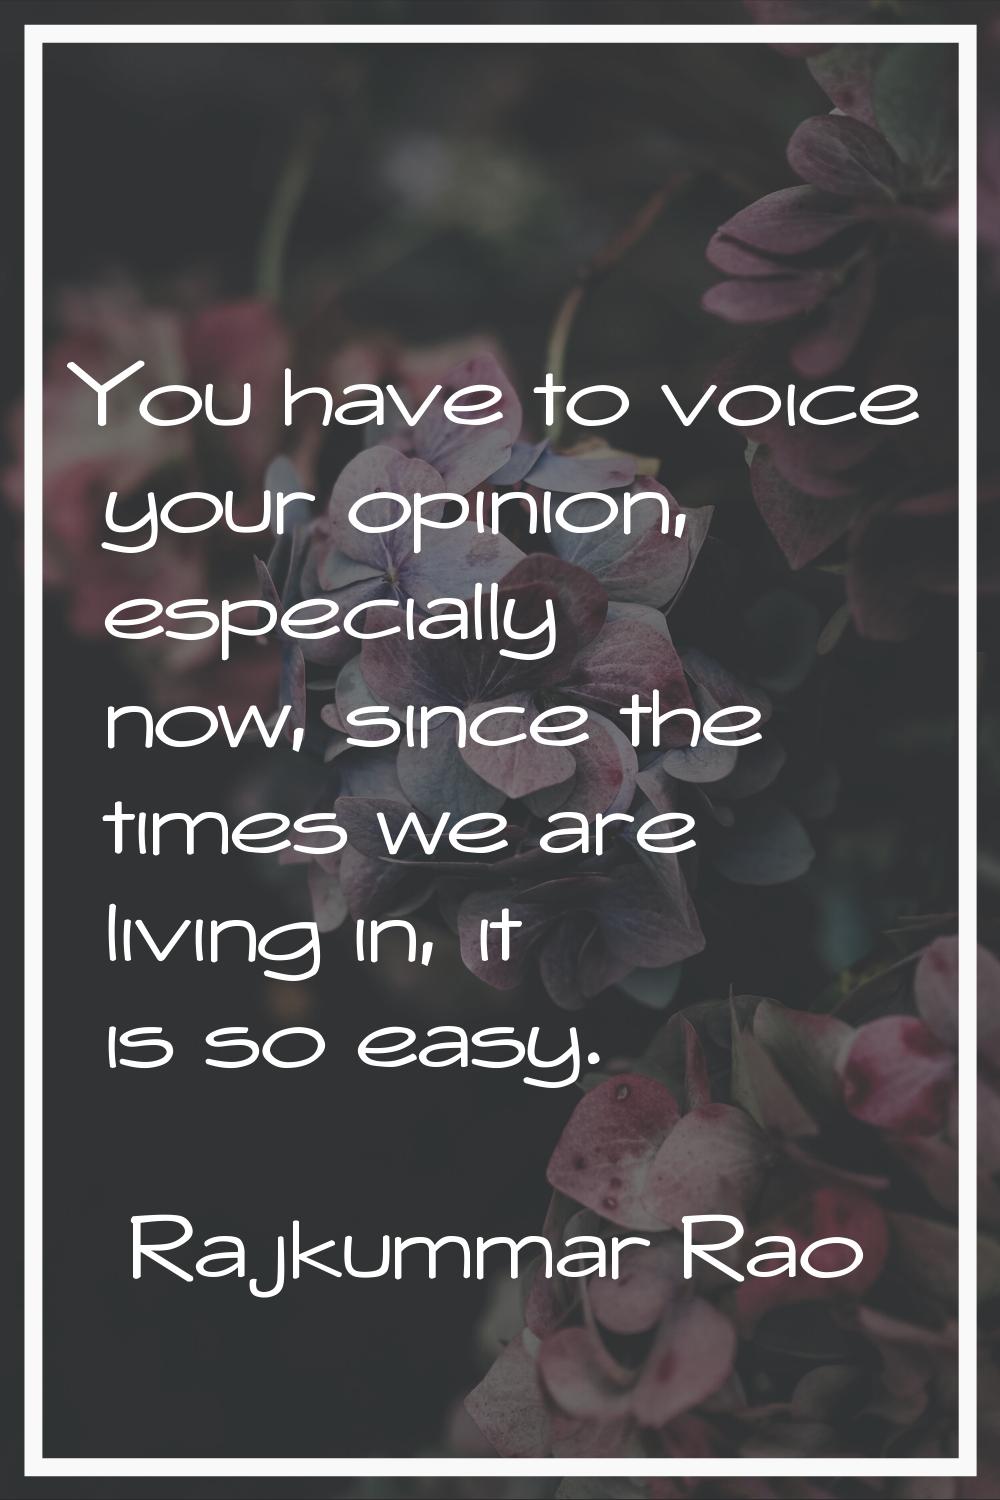 You have to voice your opinion, especially now, since the times we are living in, it is so easy.